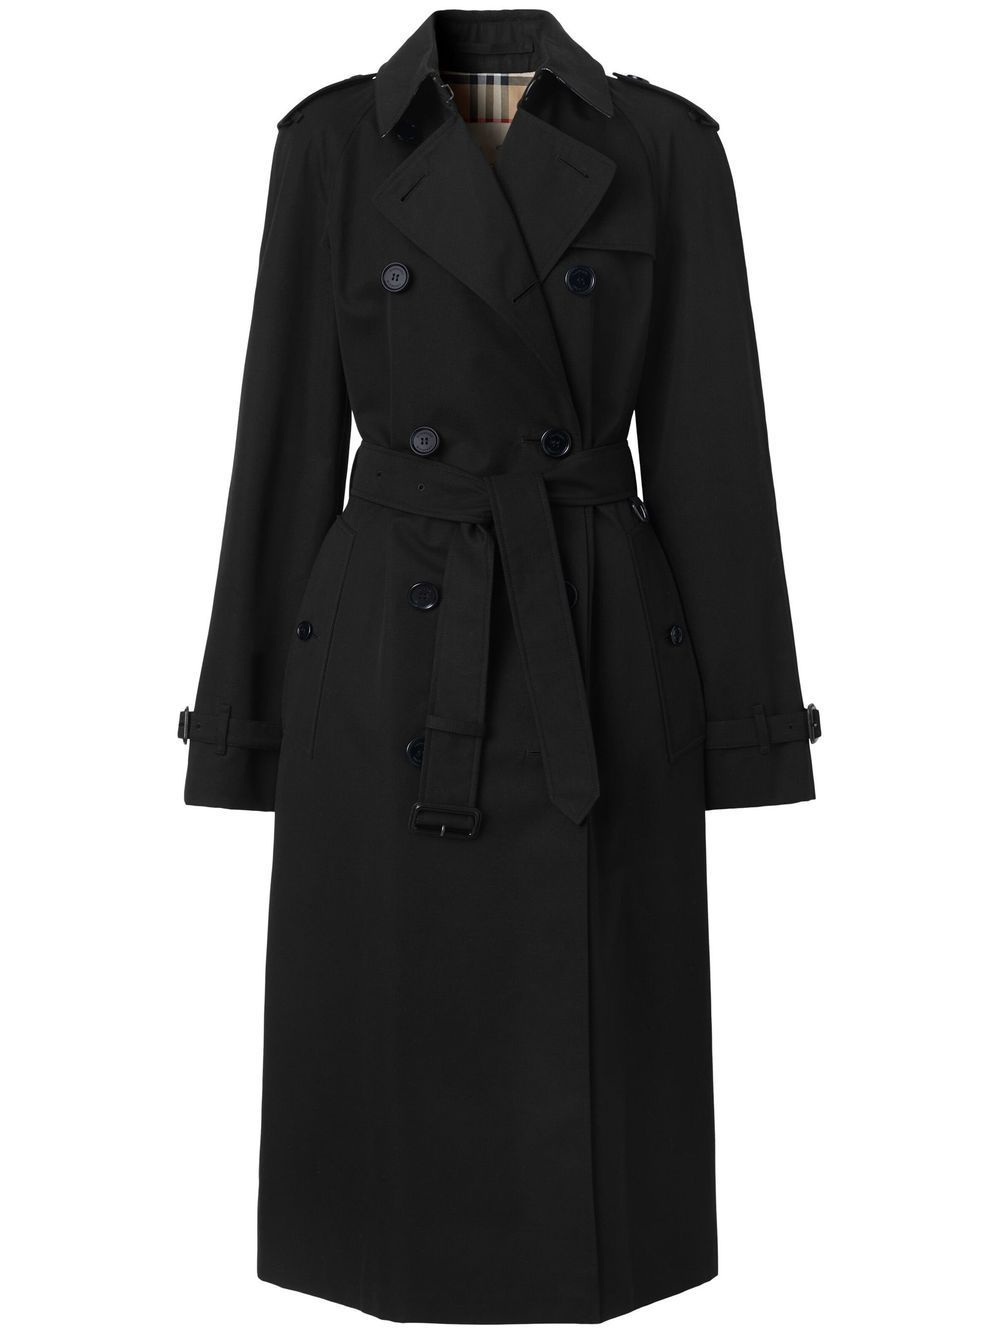 Black trench coat for winters